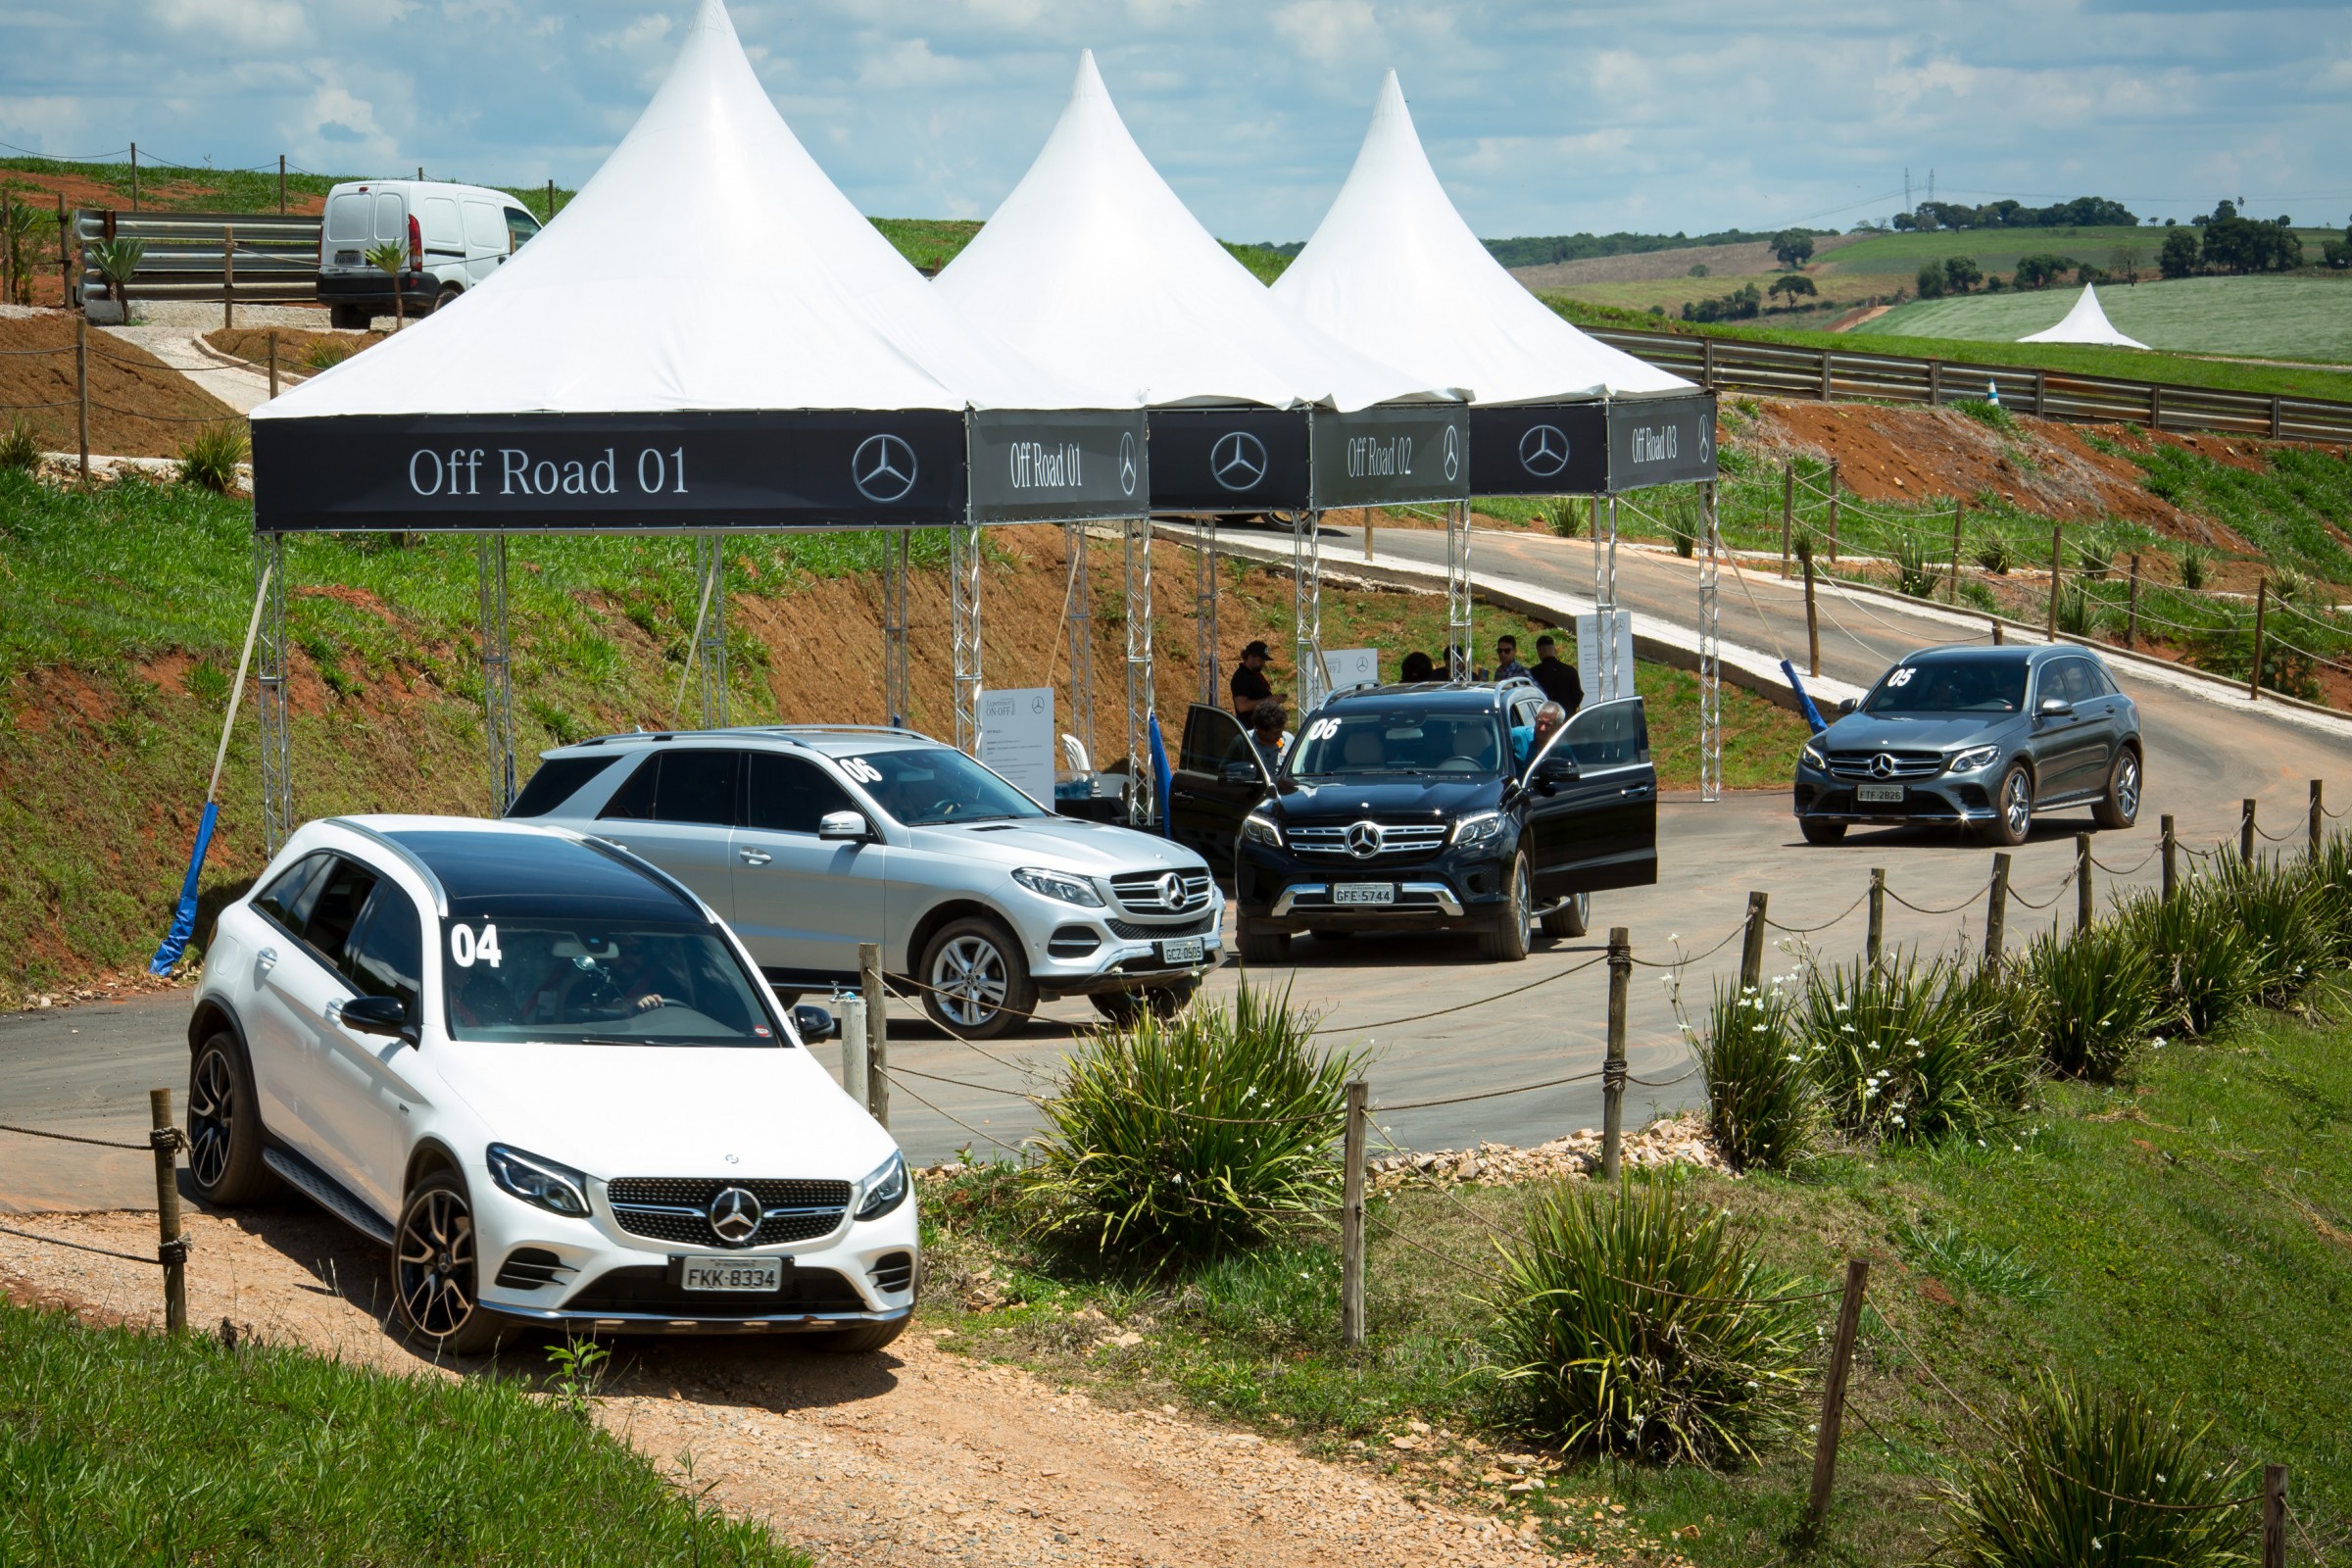 Material Mercedes-Benz Experience 2018 on off-road